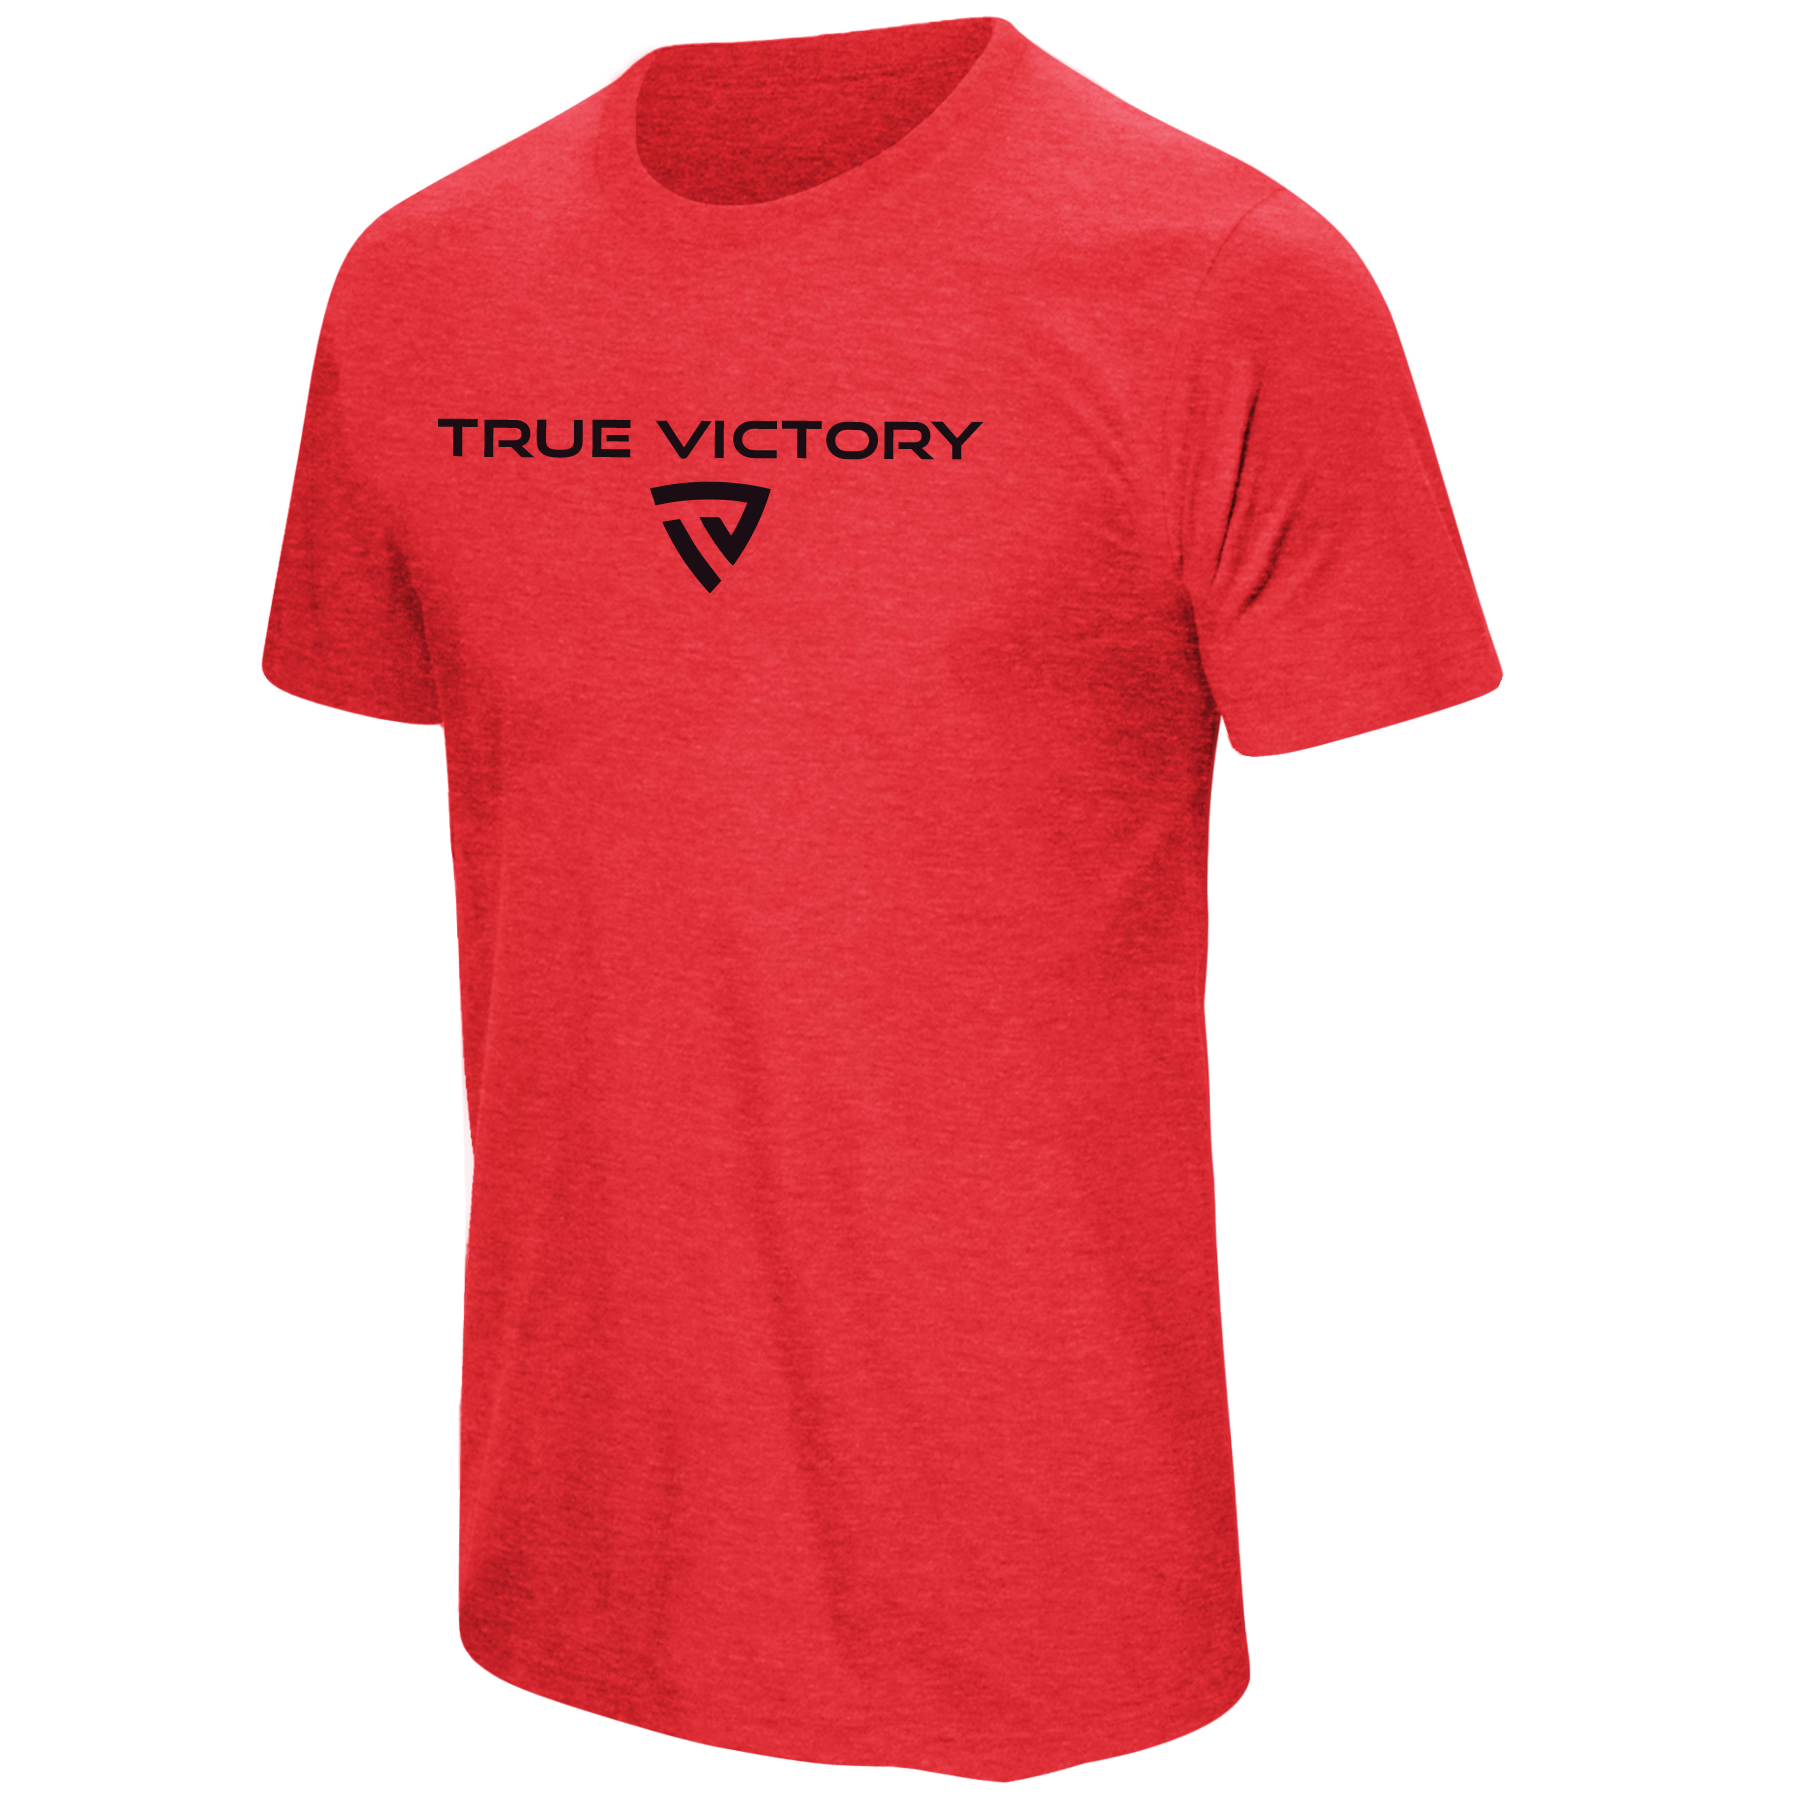 Men's Victorious Red Tee